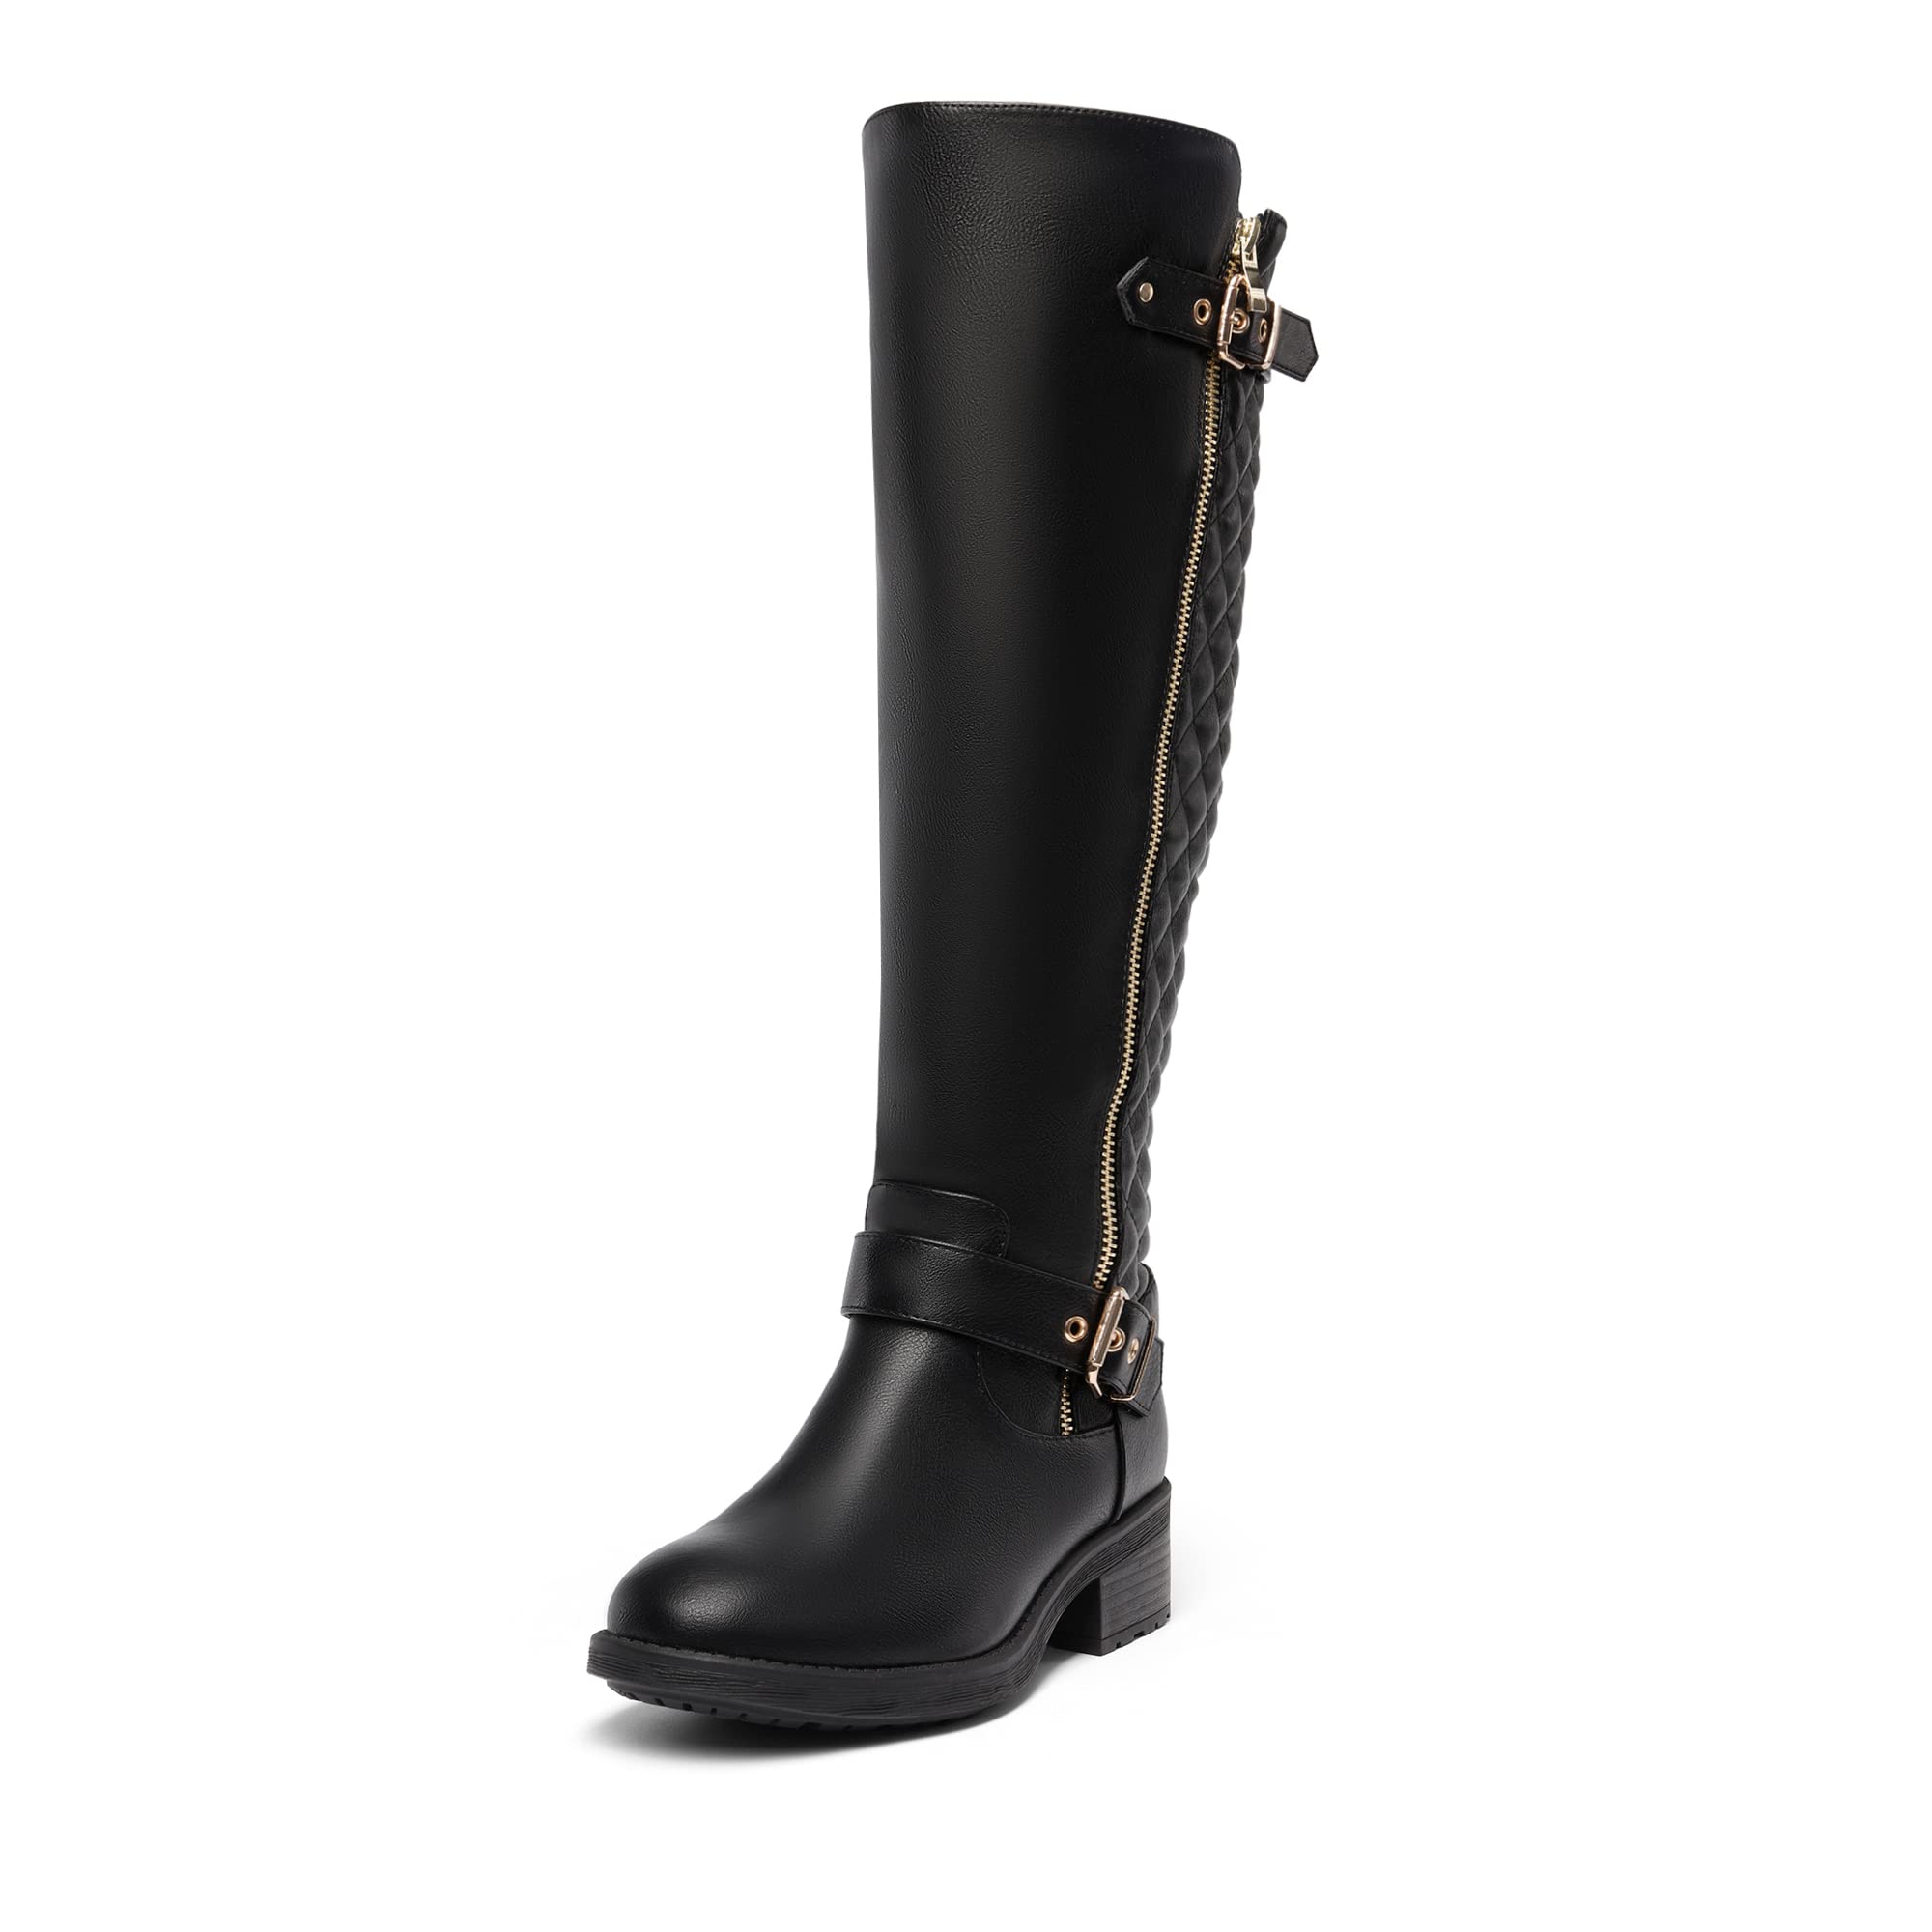 DREAM PAIRS Women's Knee High Riding Boots